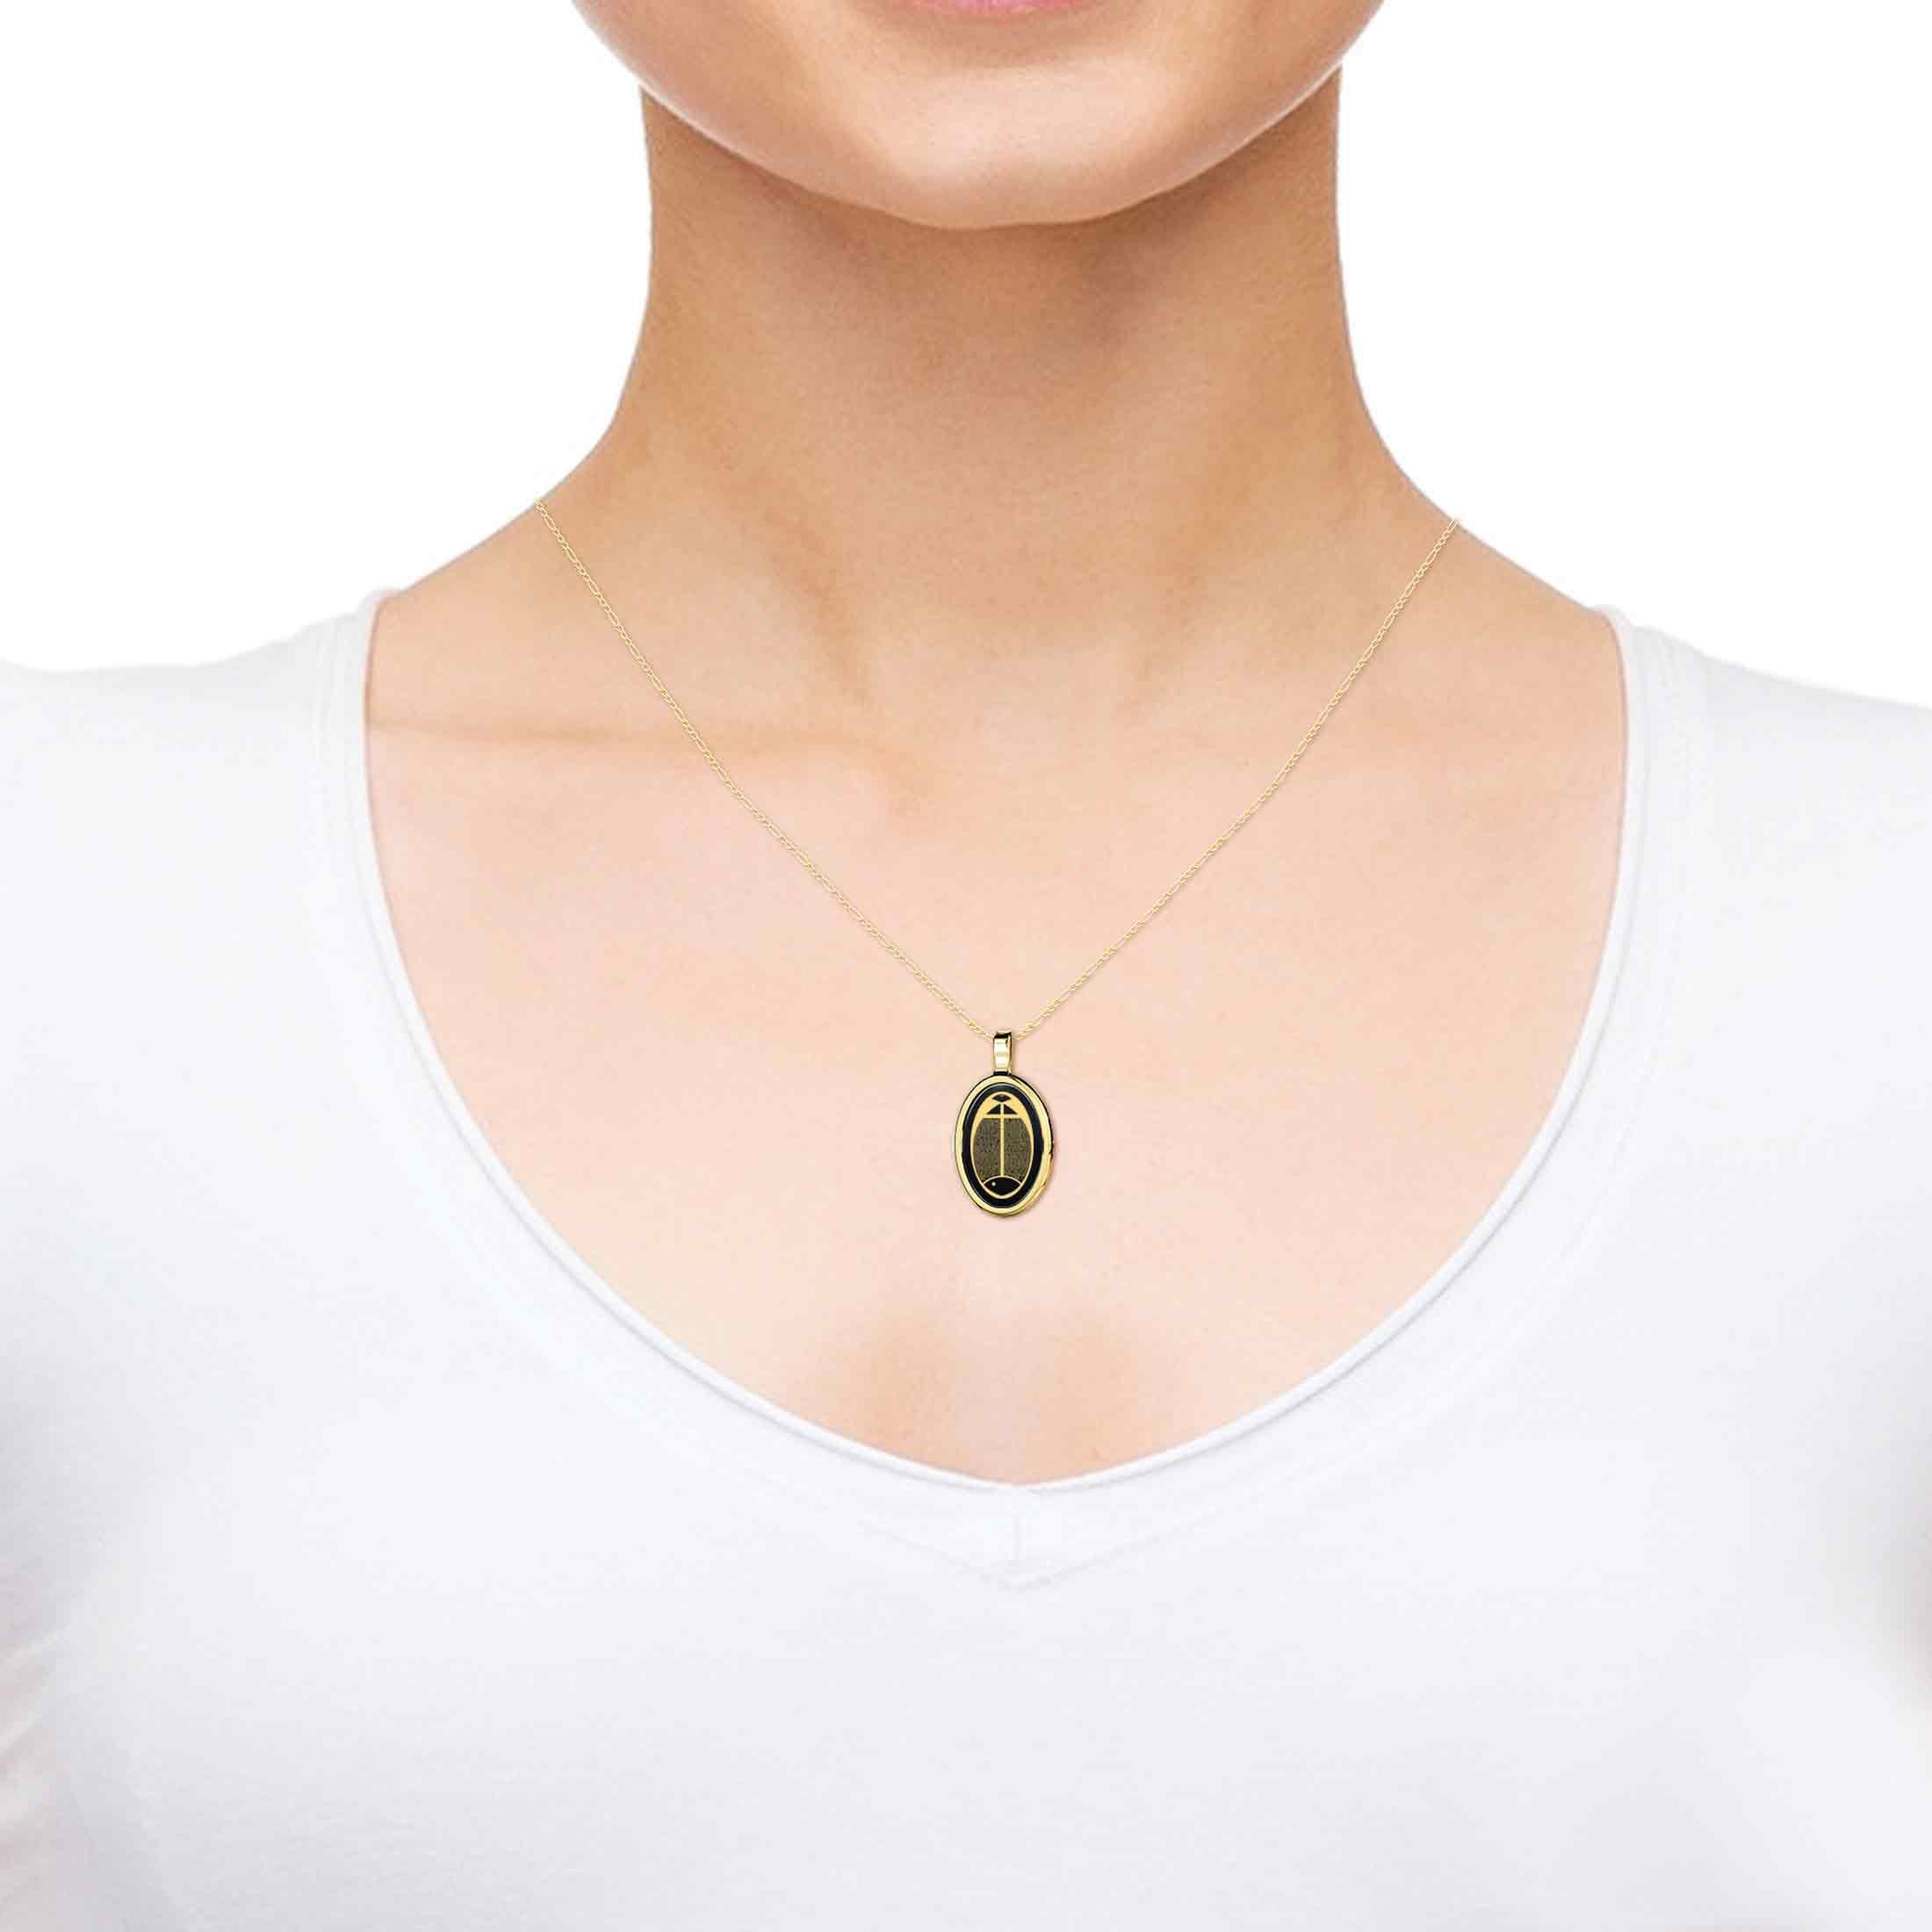 Nano Jewelry Christian Cross Necklace - Fish Pendant Inscribed with Luke 5:1-11 and John 21:3-12 in 24k Gold on Oval Black Onyx Stone, 18